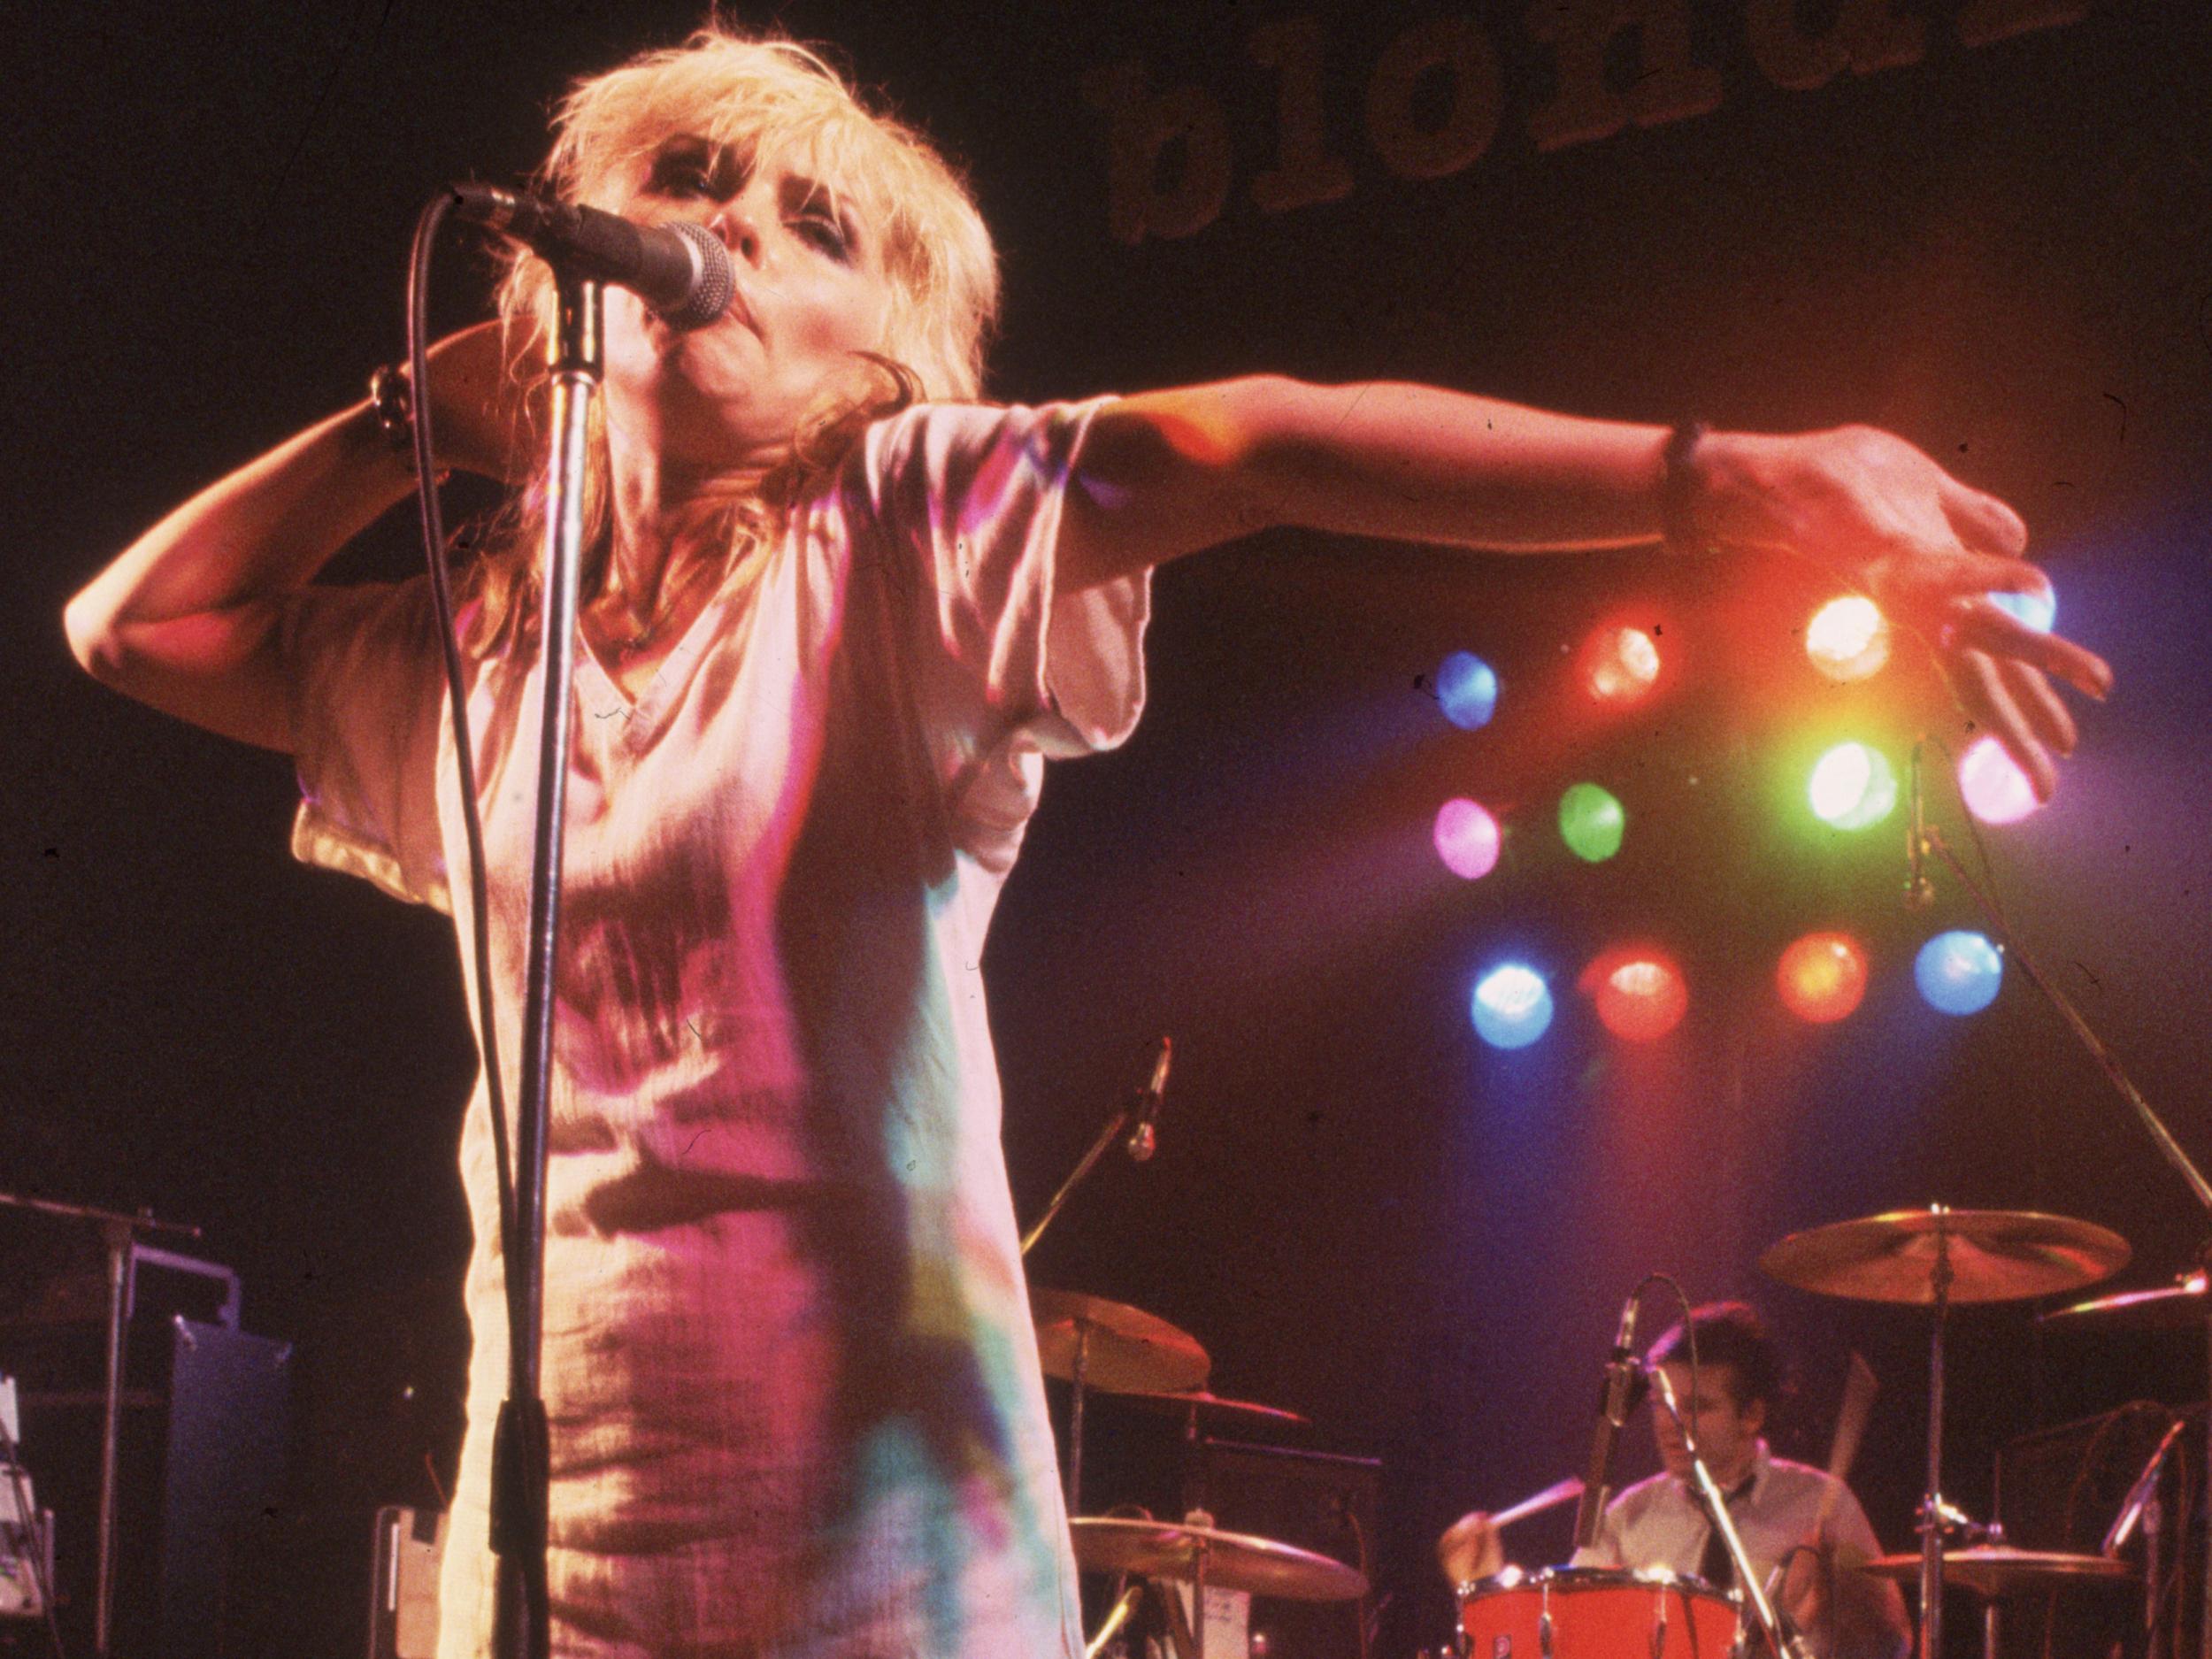 Blondie in 1977: Deborah Harry and co would in time conquer all before them